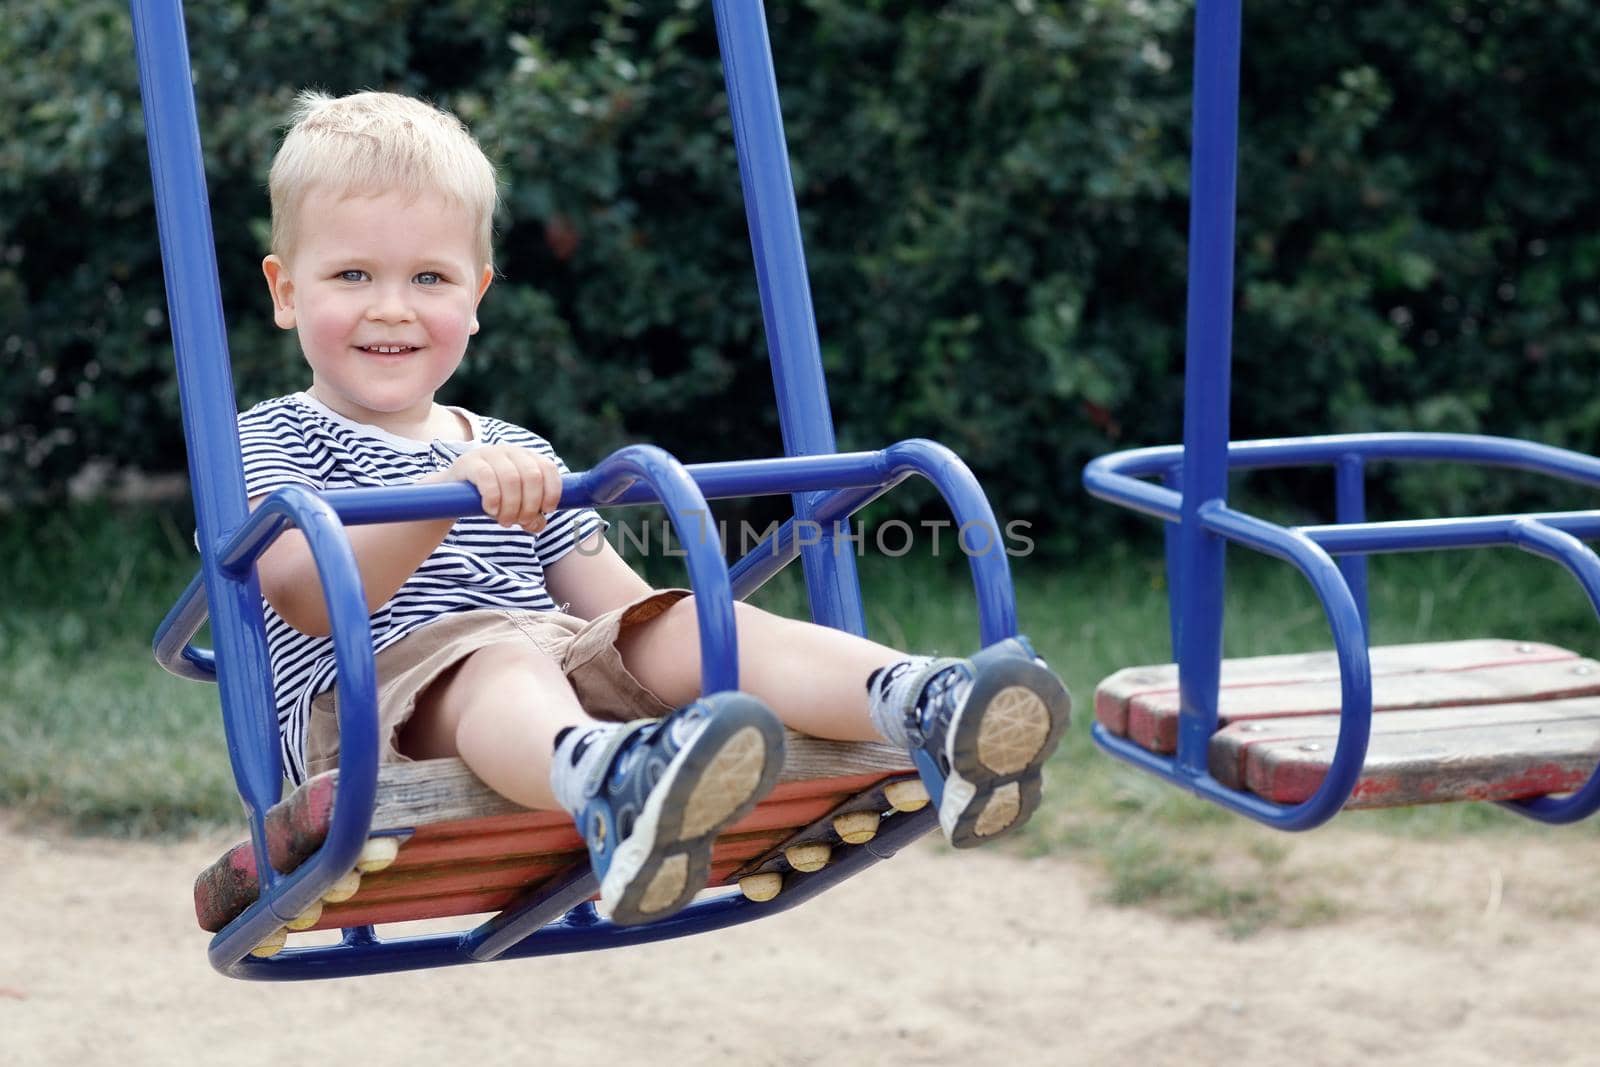 Little boy swinging on the swings of a public playground. Looking at camera and smiling. Happy childhood